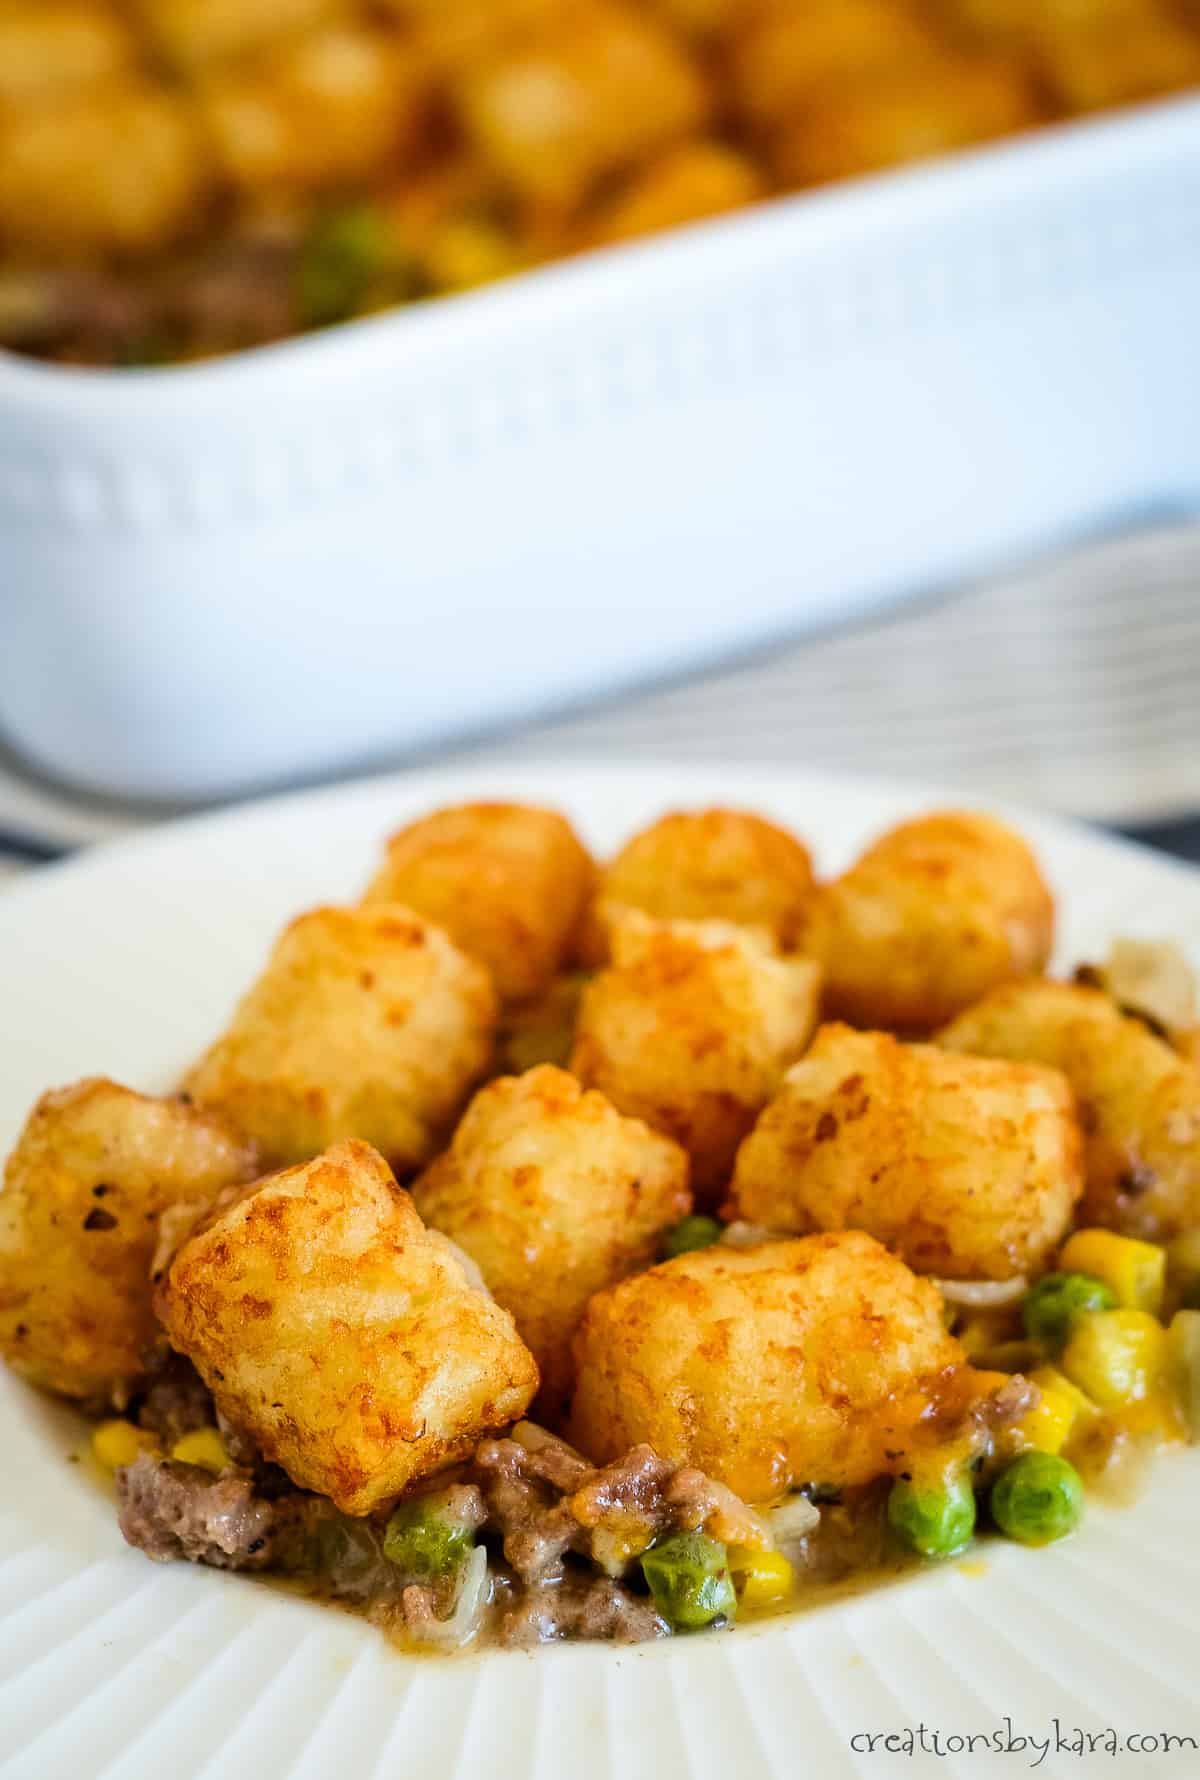 plate of tater tot casserole with a white baking dish in the background